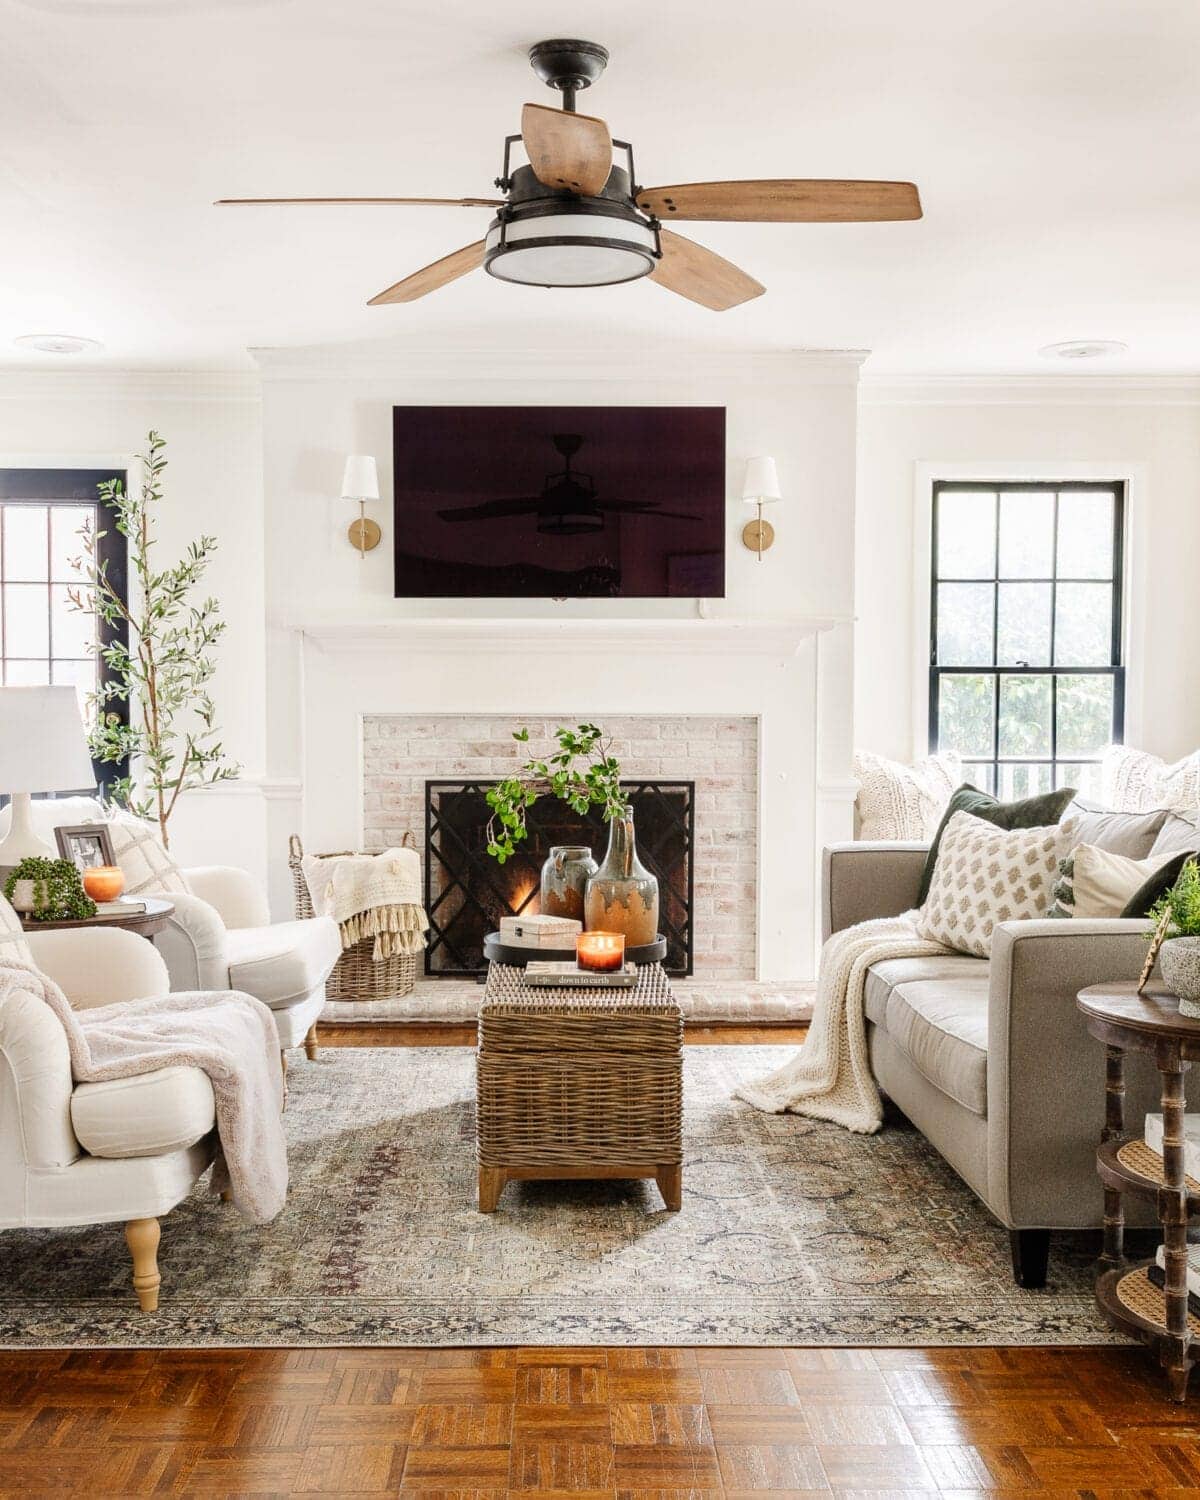 Five Benefits Of A Small Ceiling Fan